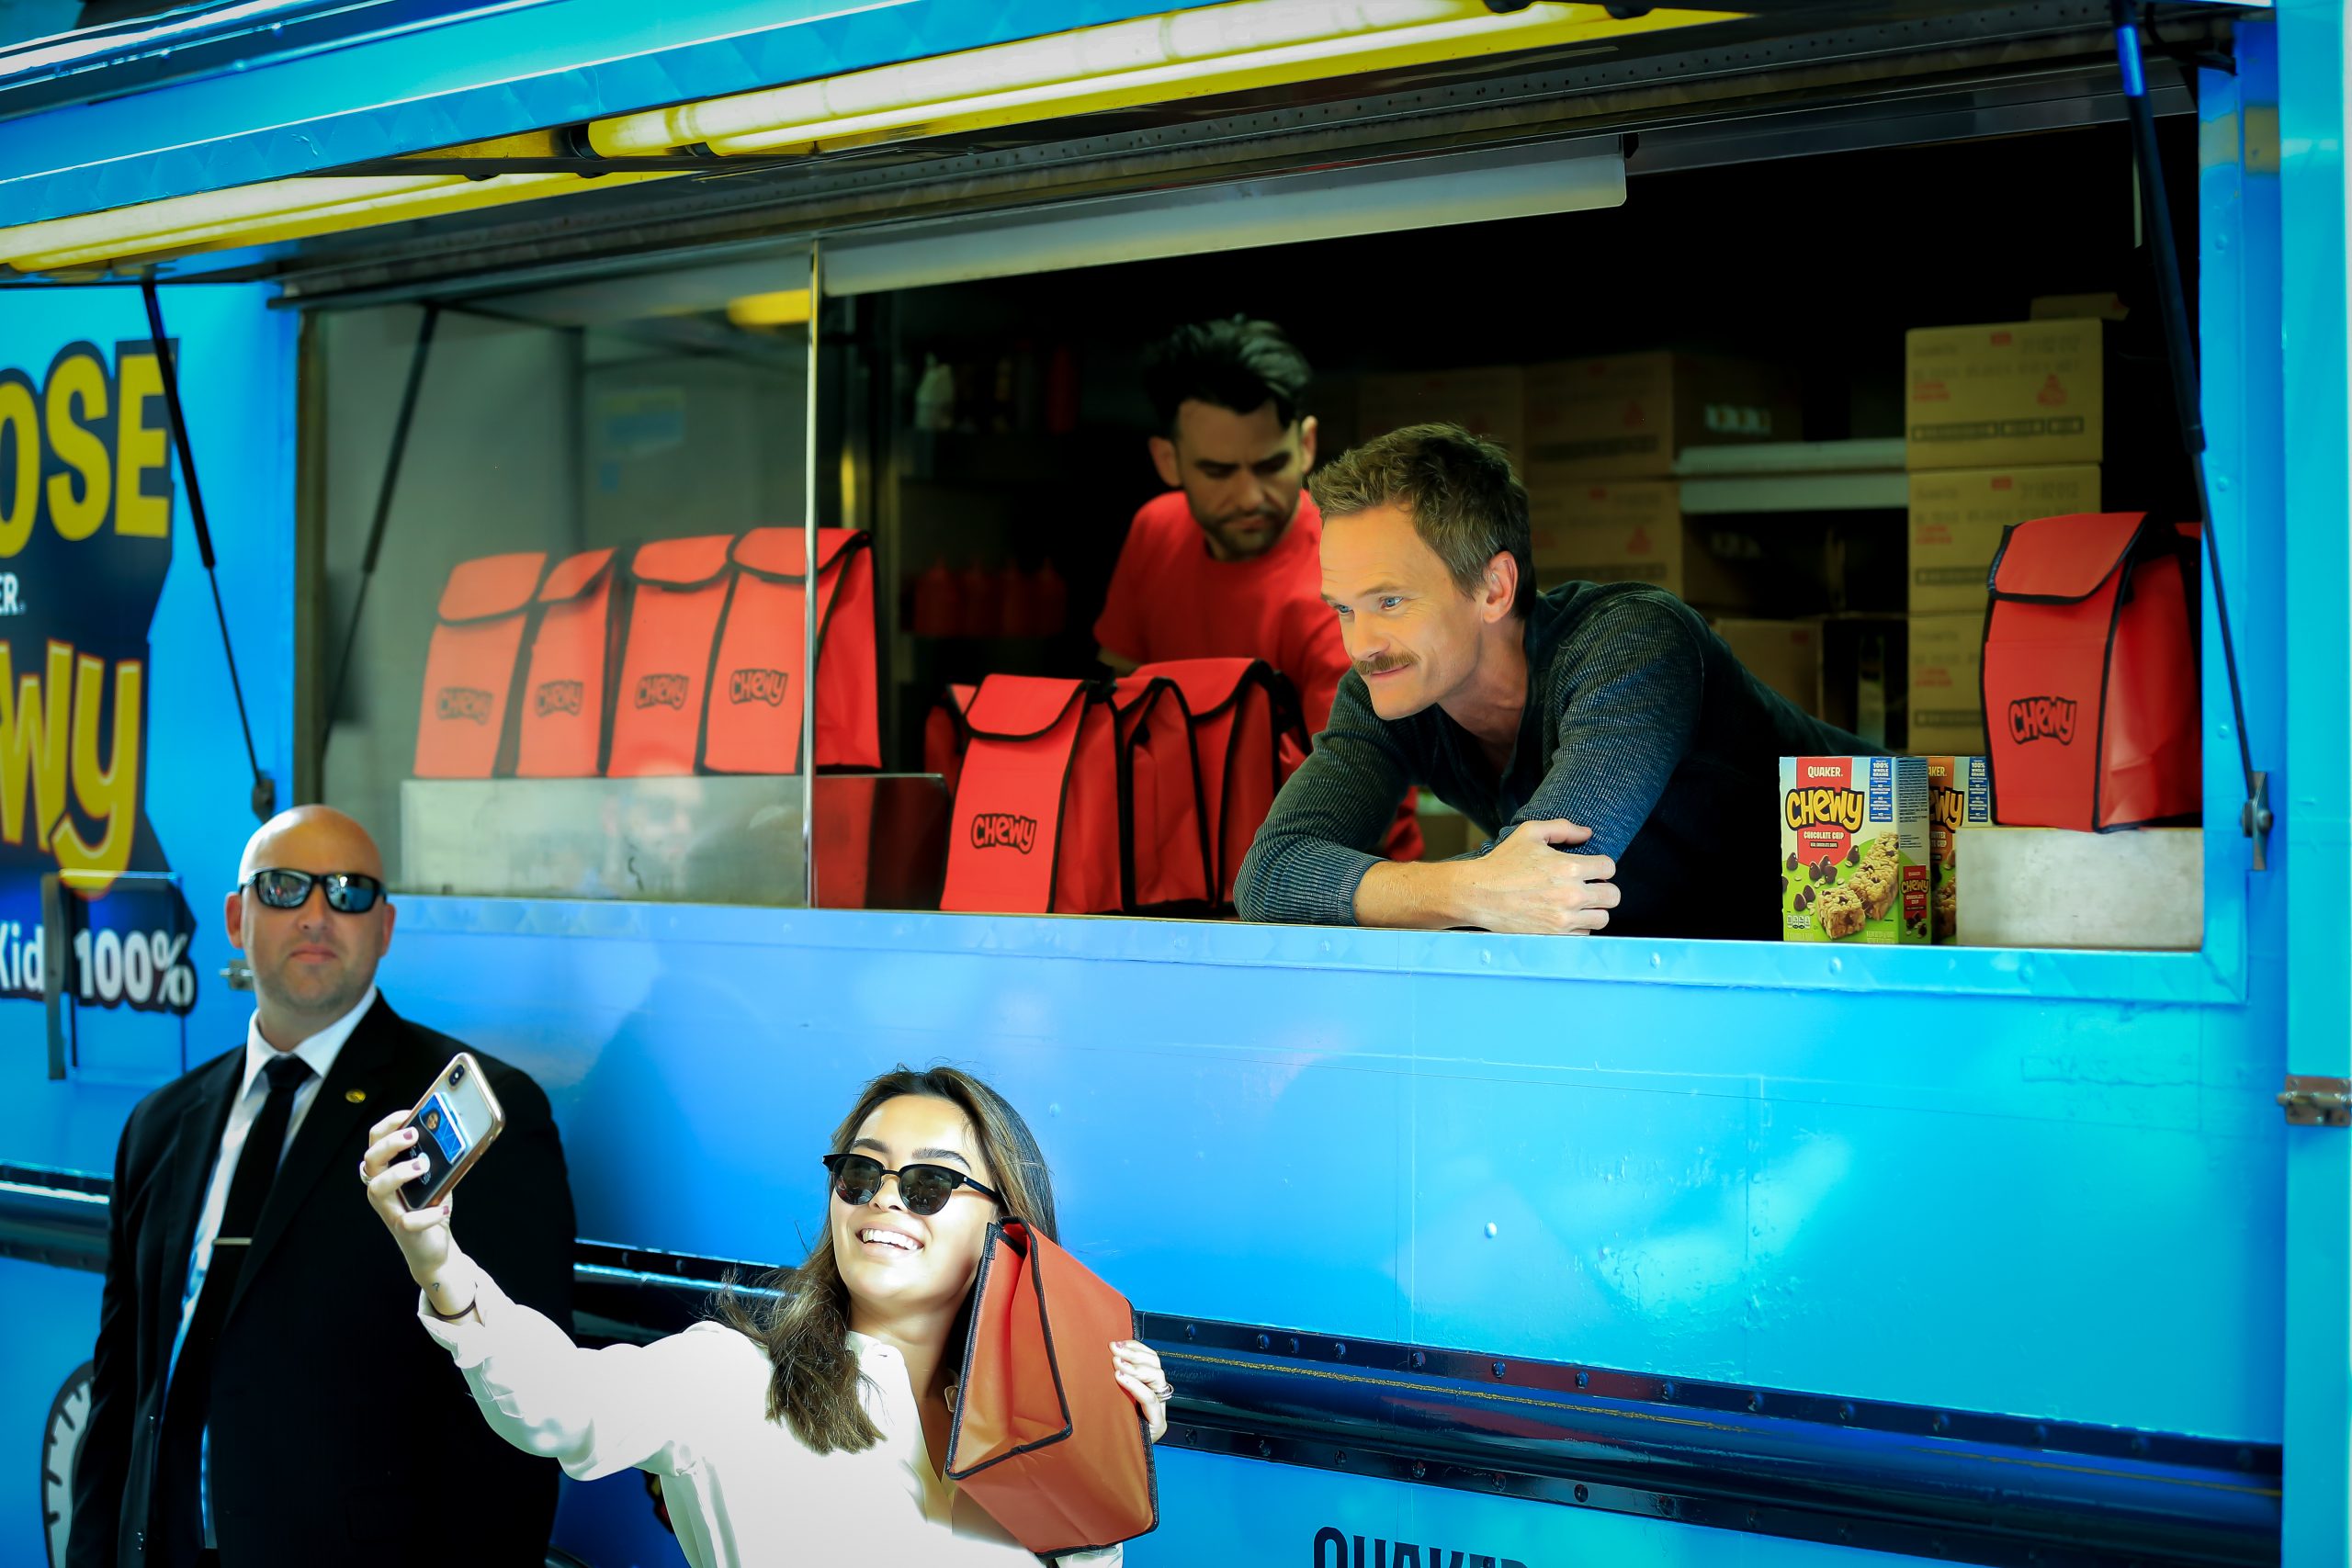 Neil Patrick Harris visits Chewy food truck NYC for adoptaclassroom promotion